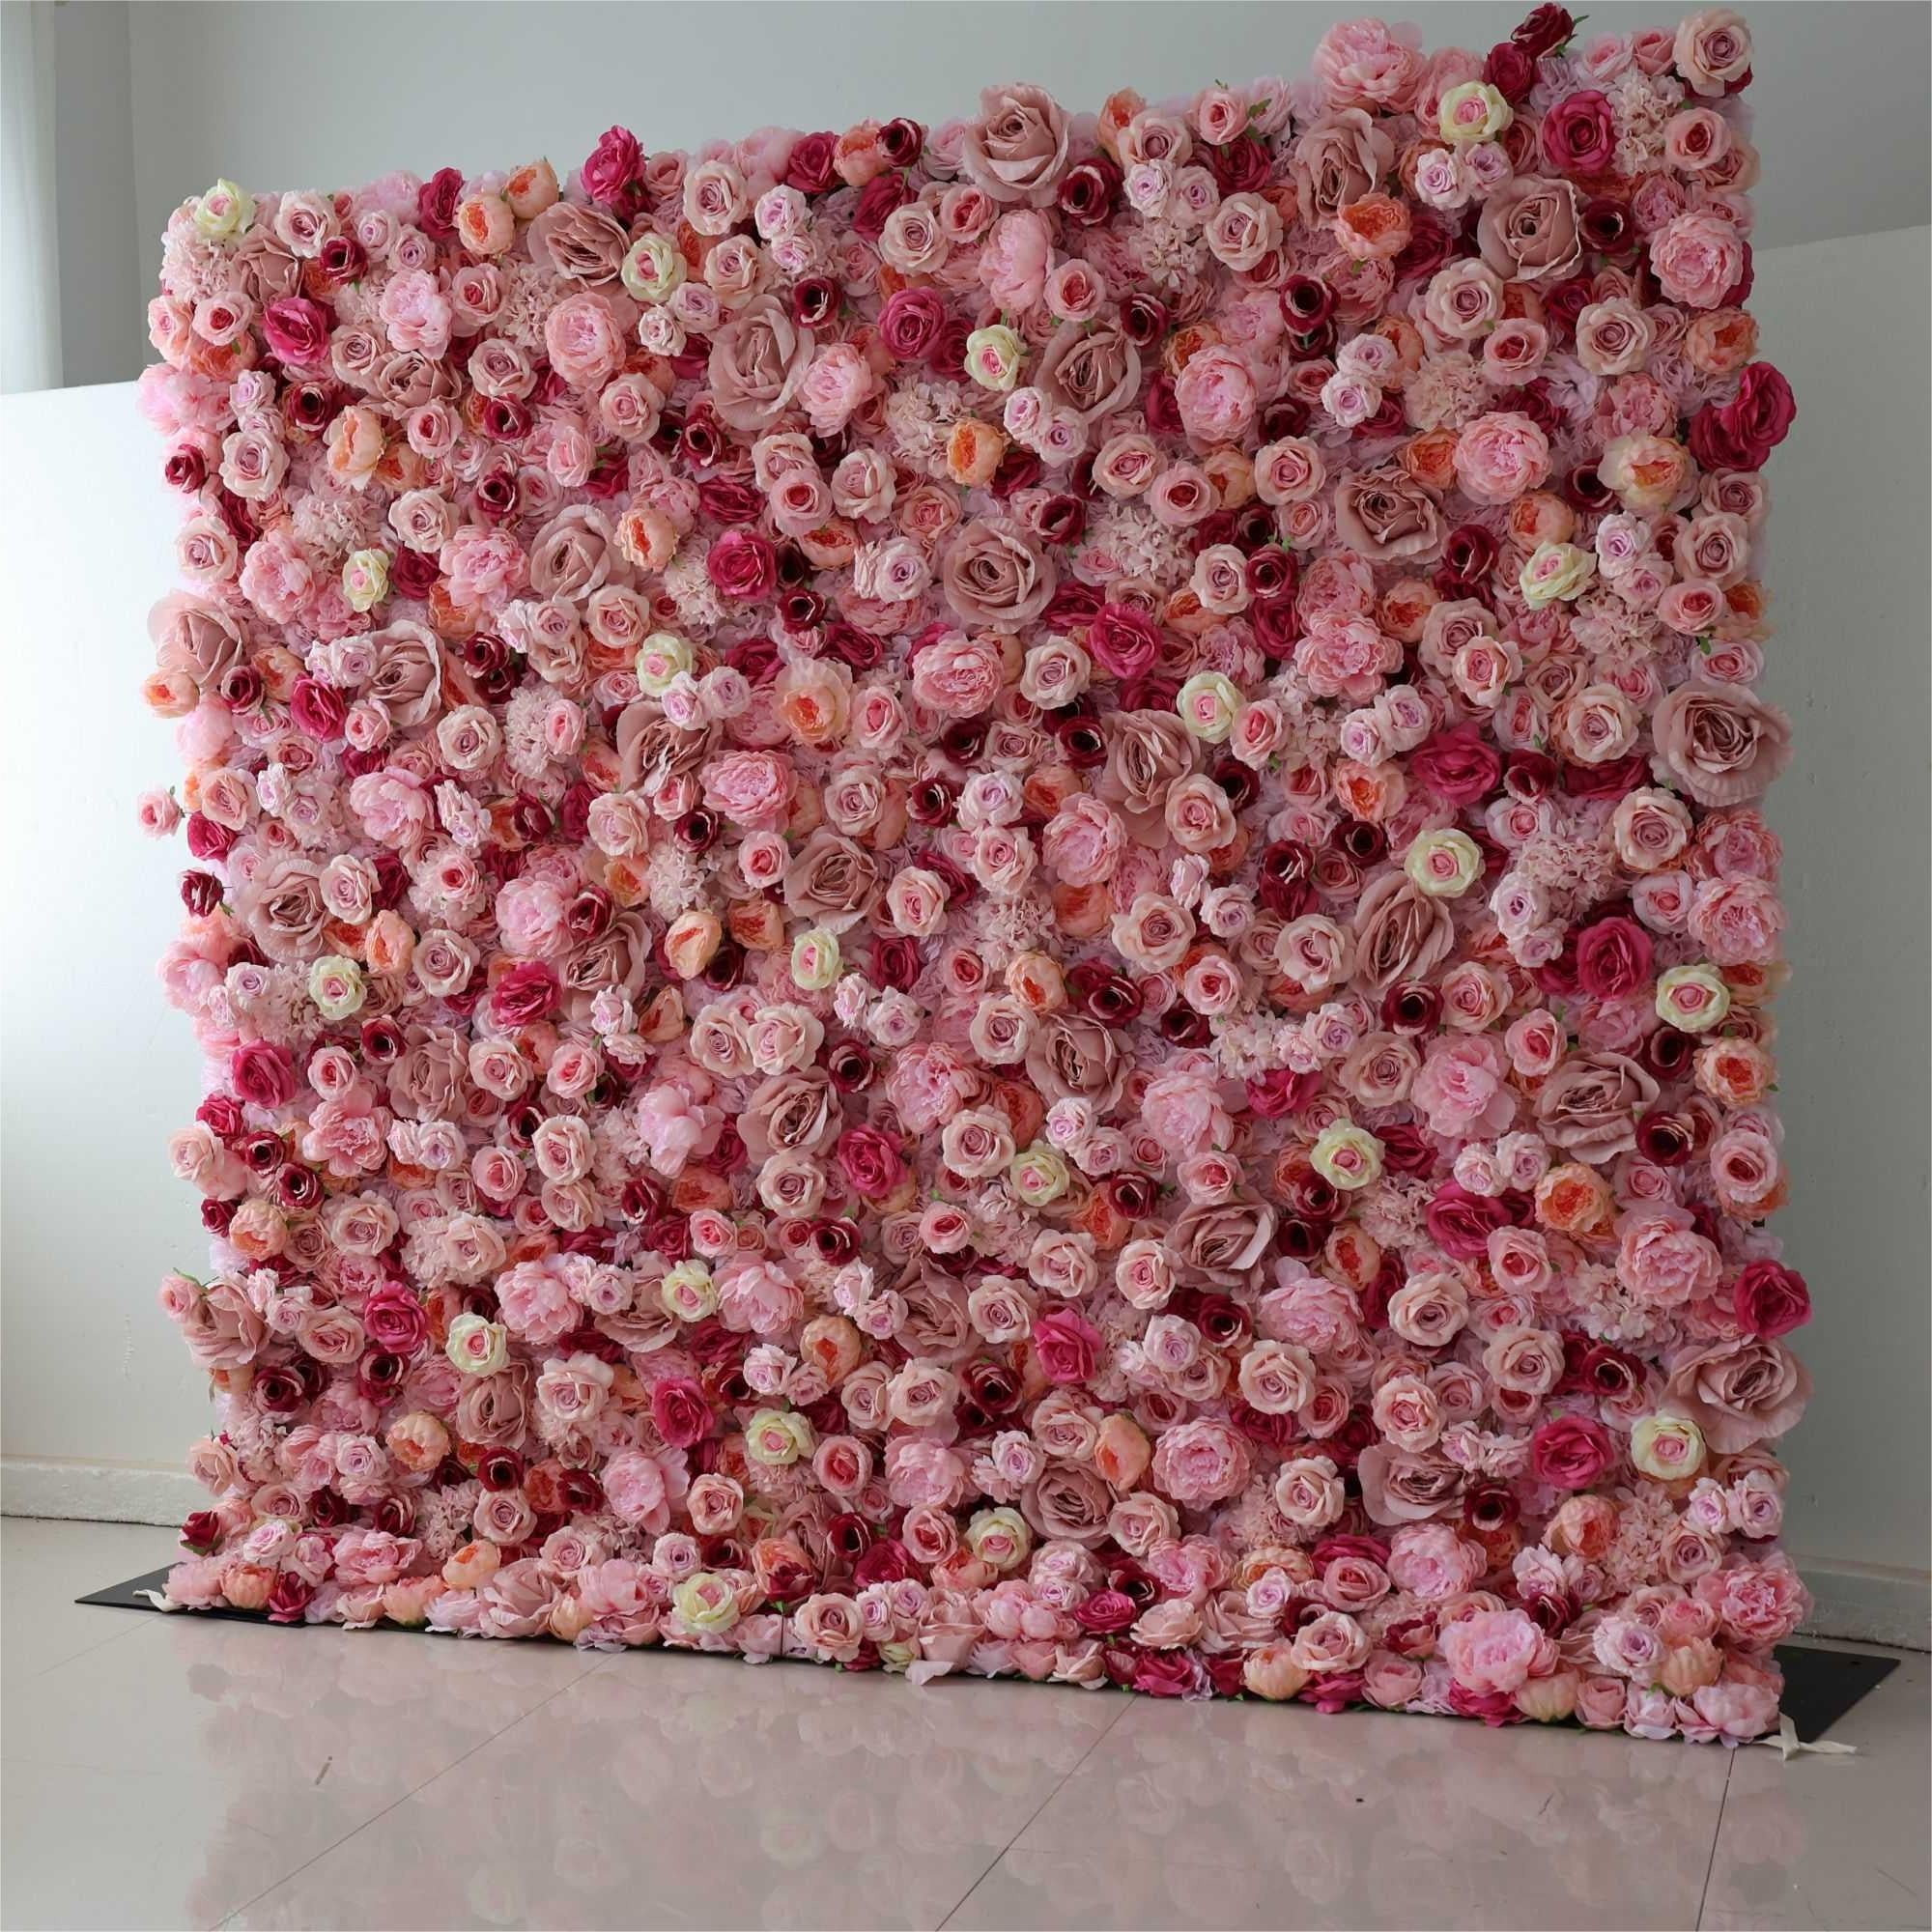 Flower Wall Colorful Pink Fabric Rolling Up Curtain Floral Backdrop Wedding Party Proposal Decor